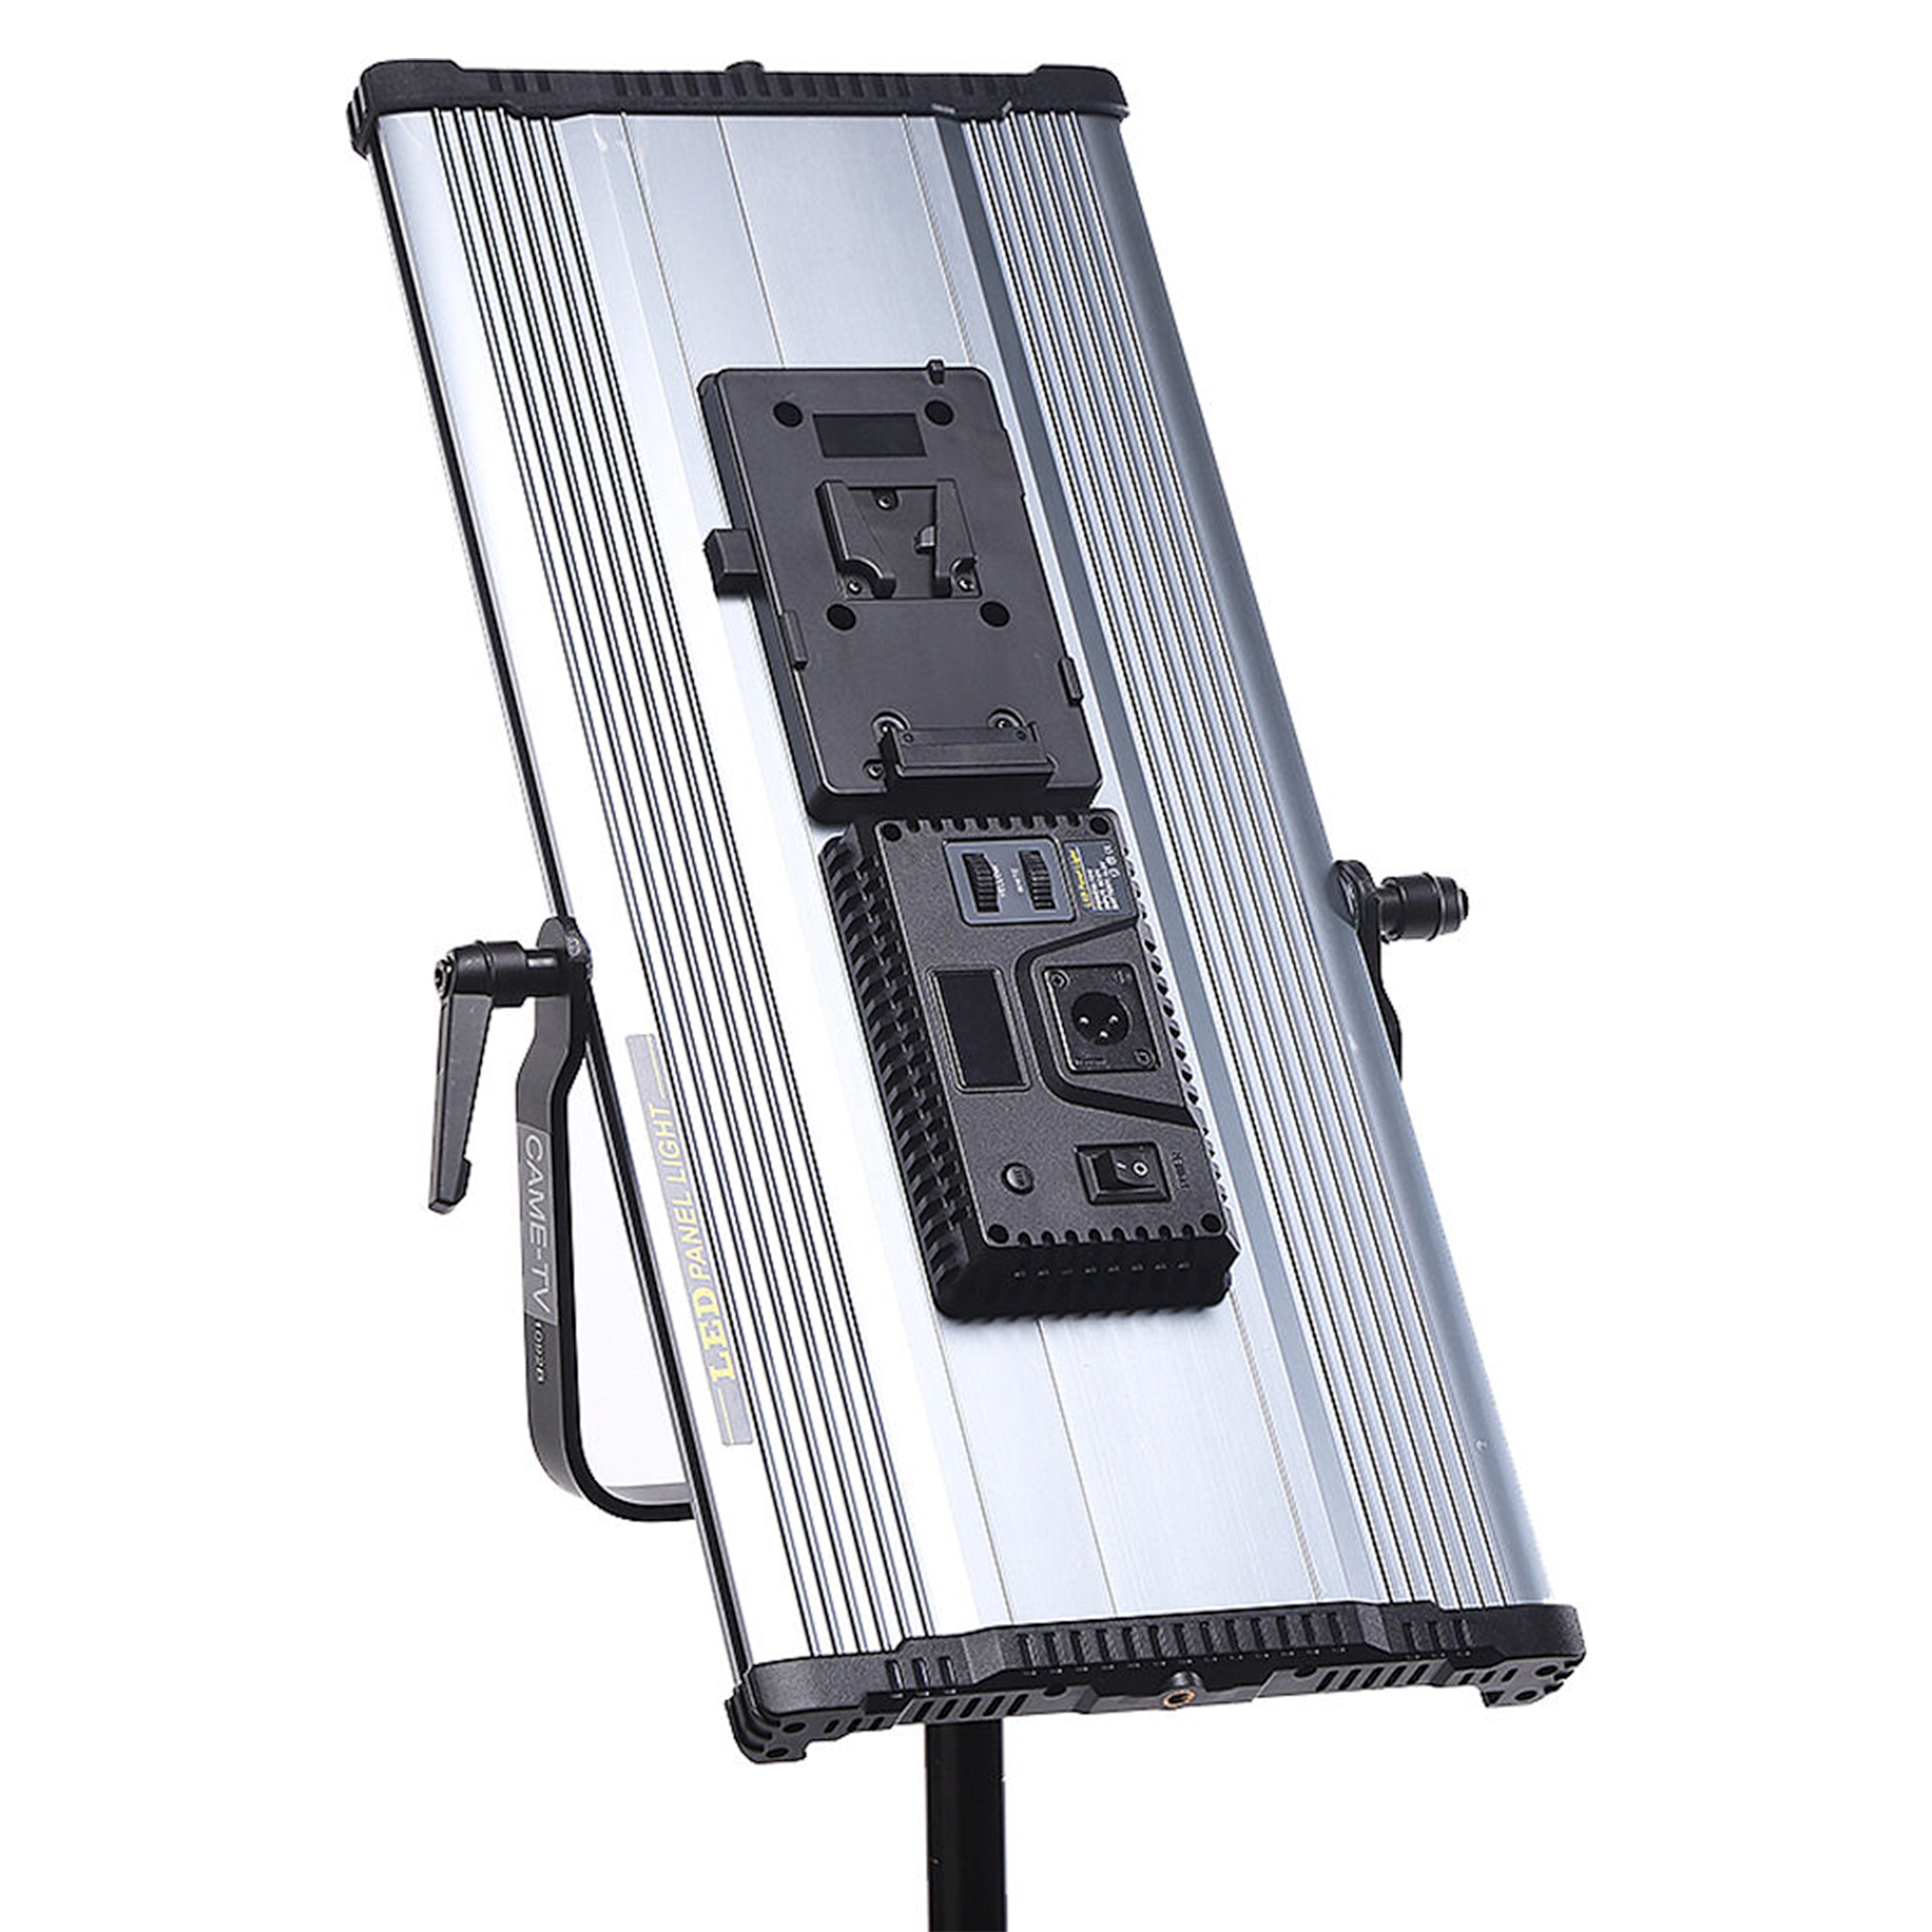 Came-TV 1092D 2 x Daylight LED Panel Set, Incl 2 x Stands, 2 x PSU and 2 x bags.No Batteries or Chargers included